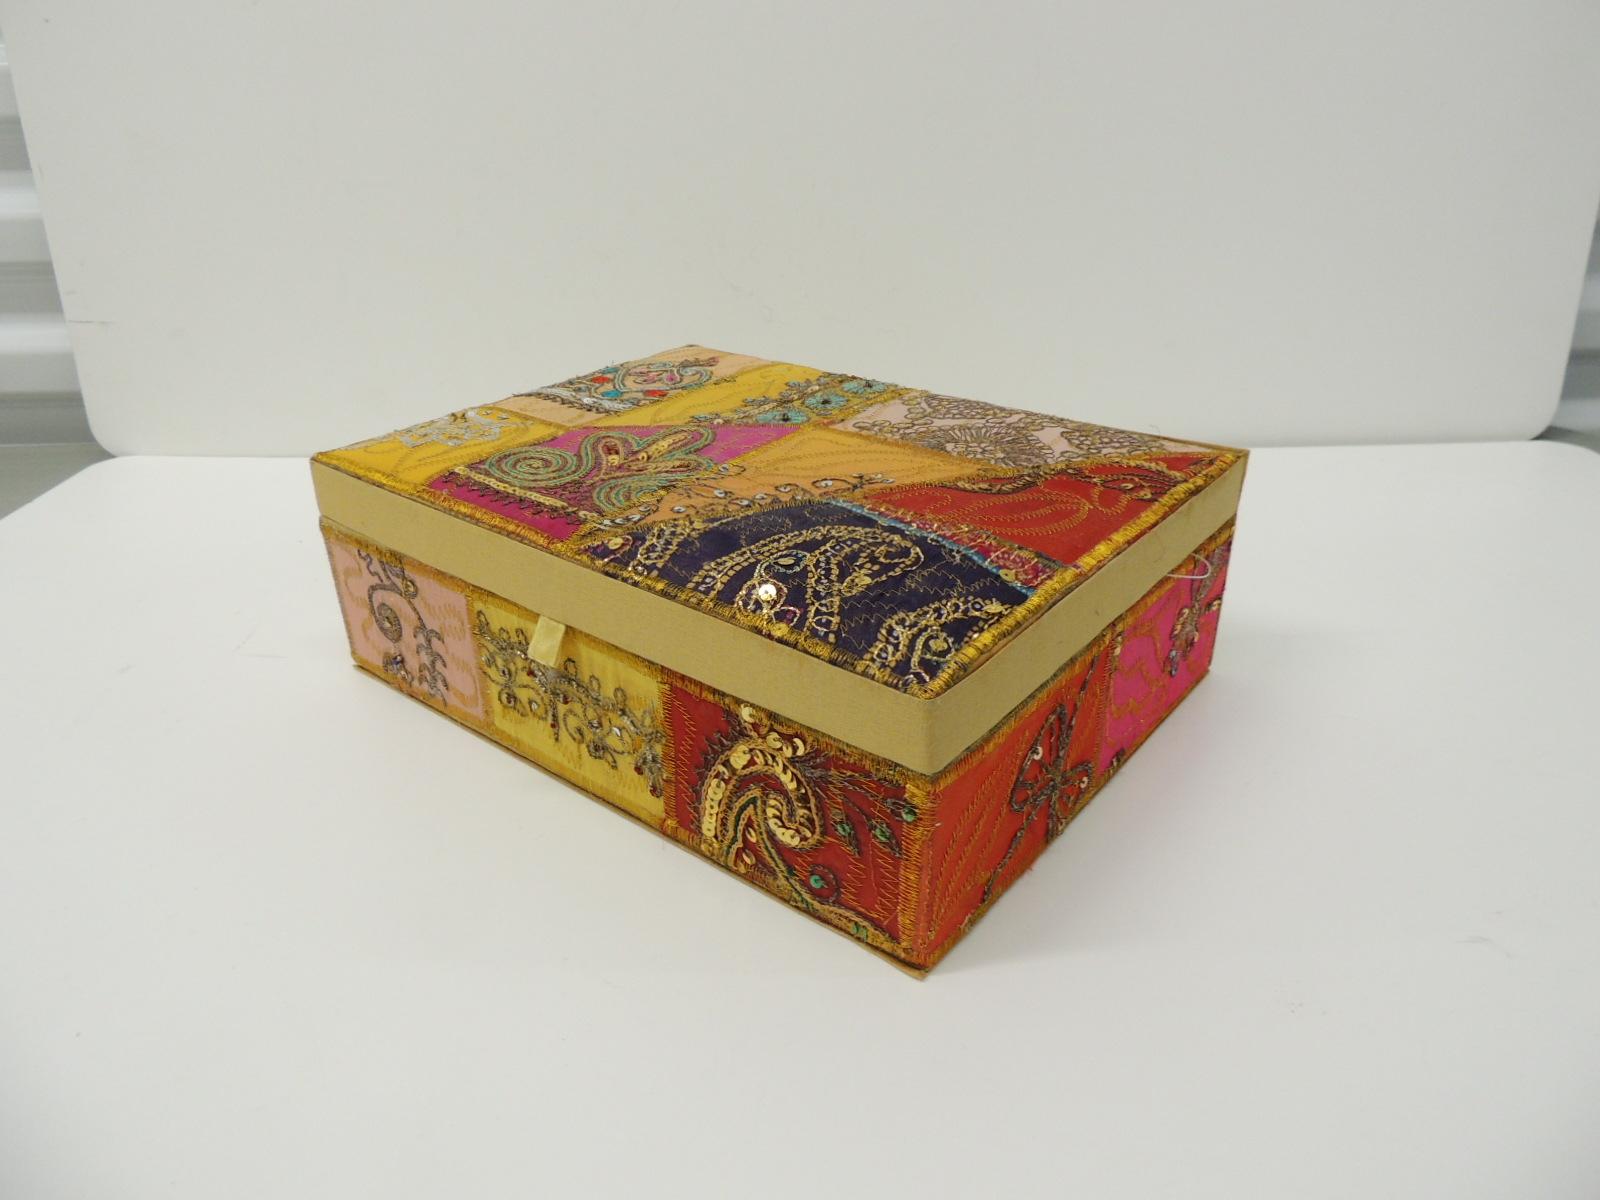 Embroidered Indian Artisanal jewelry box with mirror
Size: 8.5